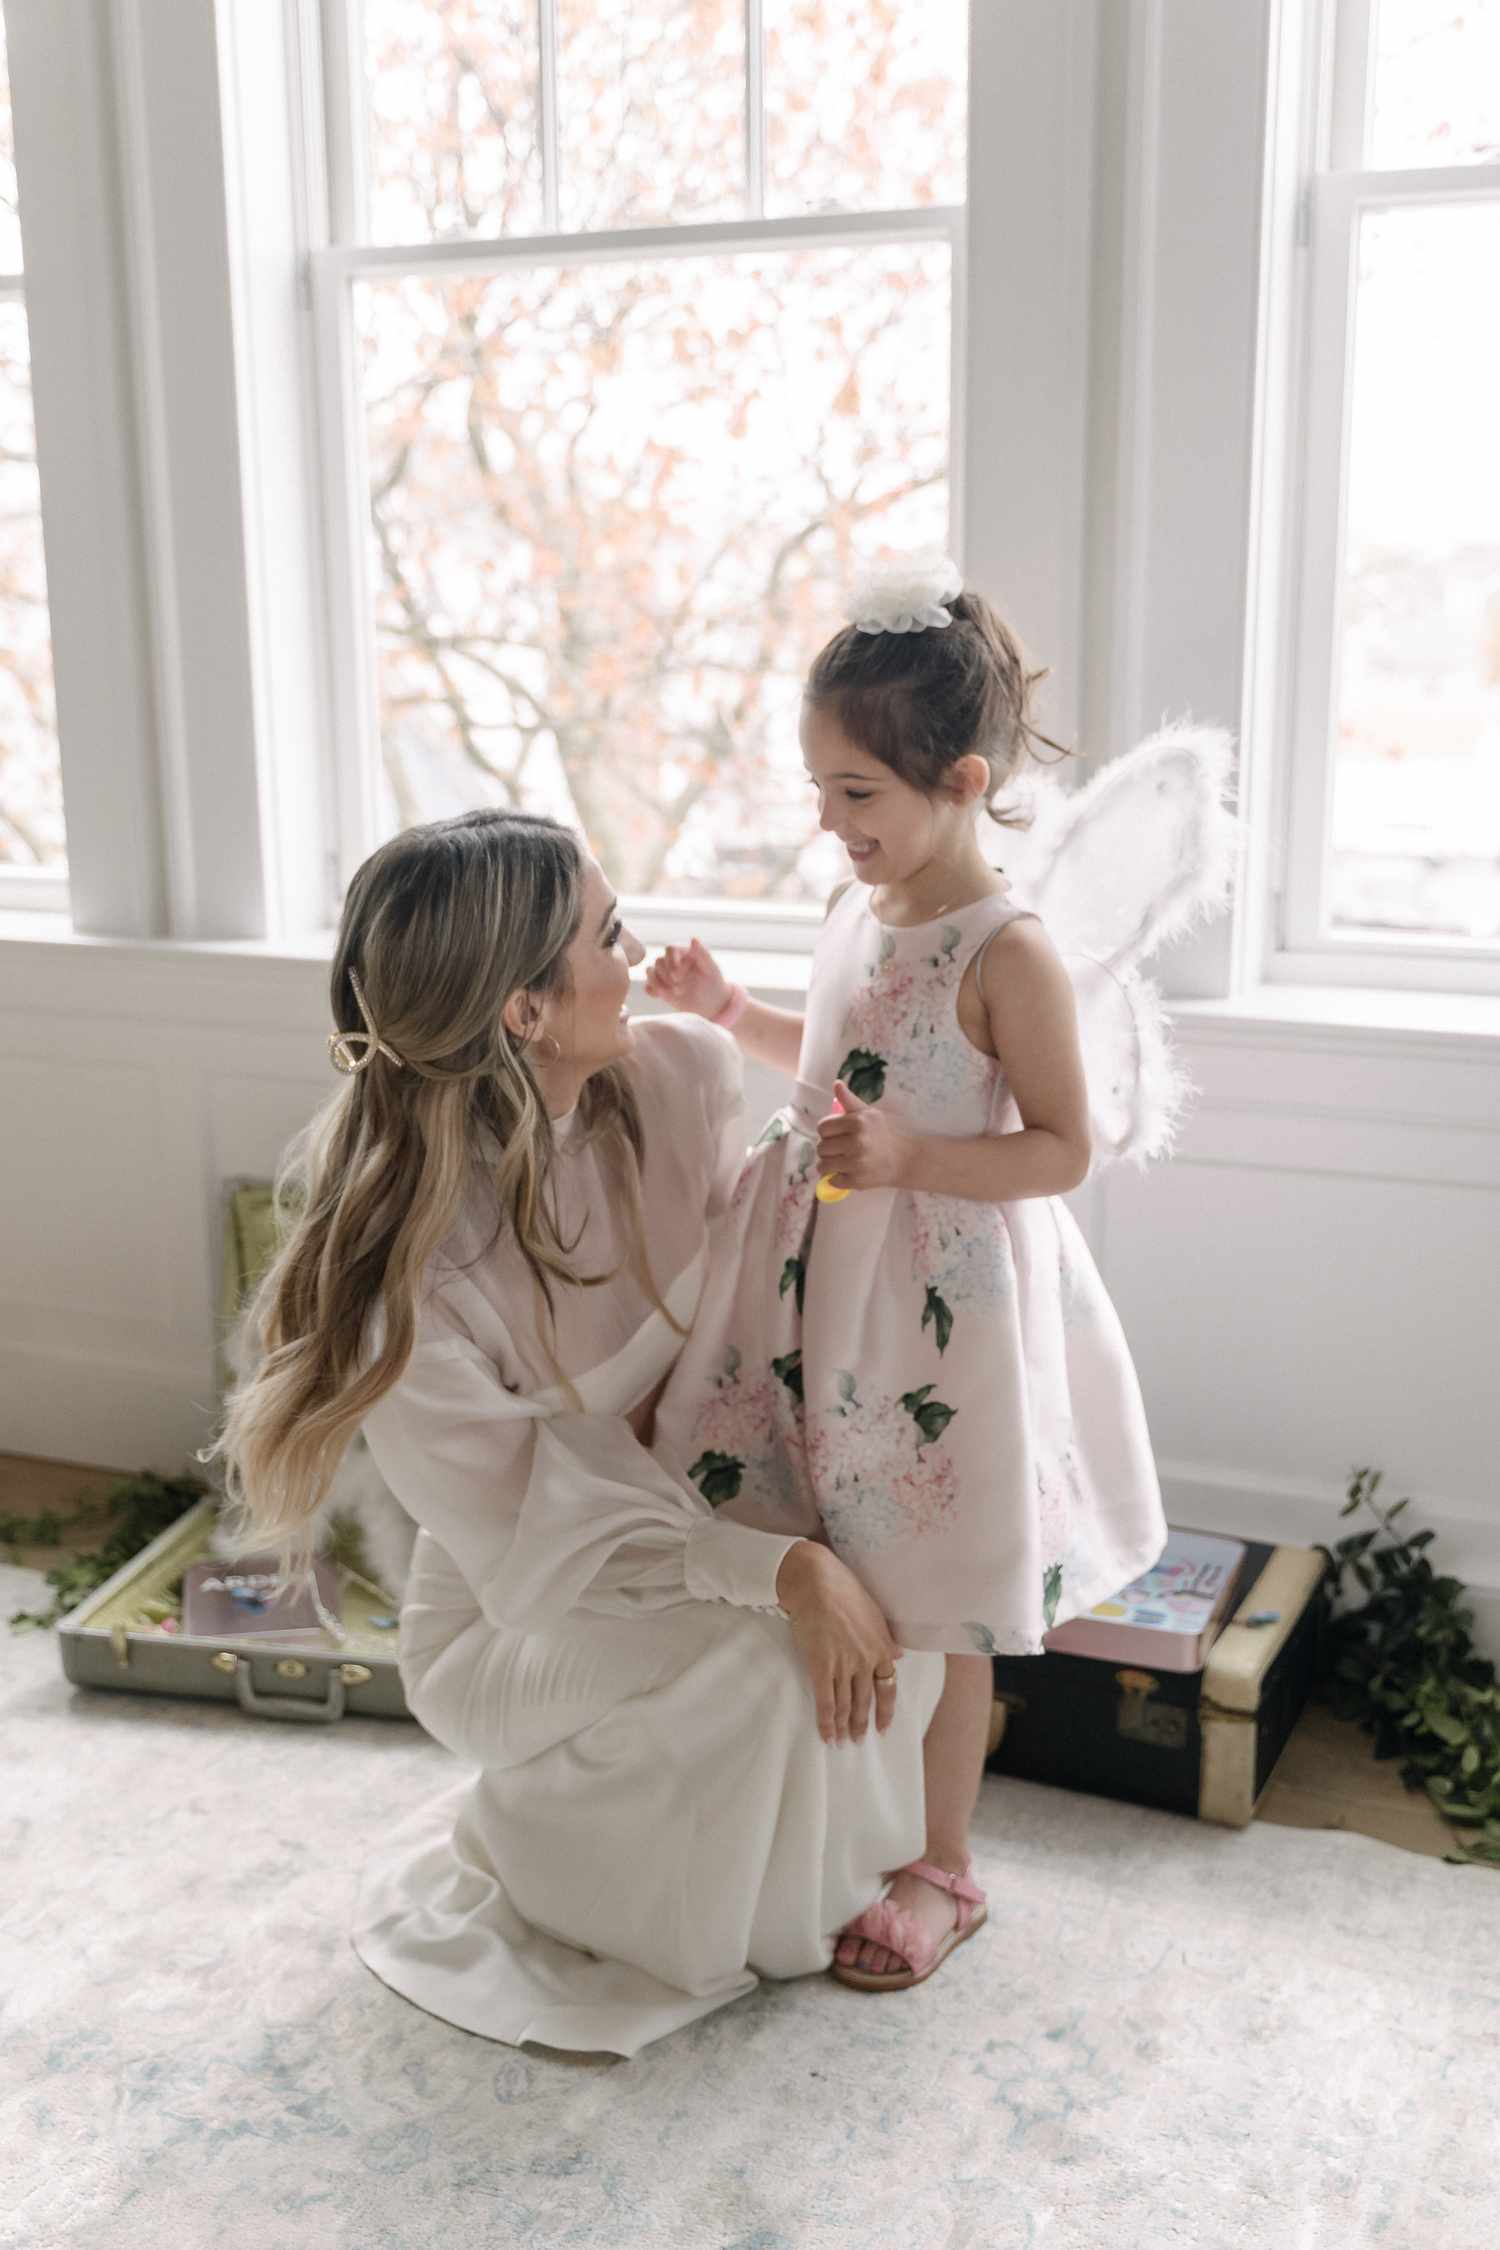 Bride With Young Girl at Bridal Shower